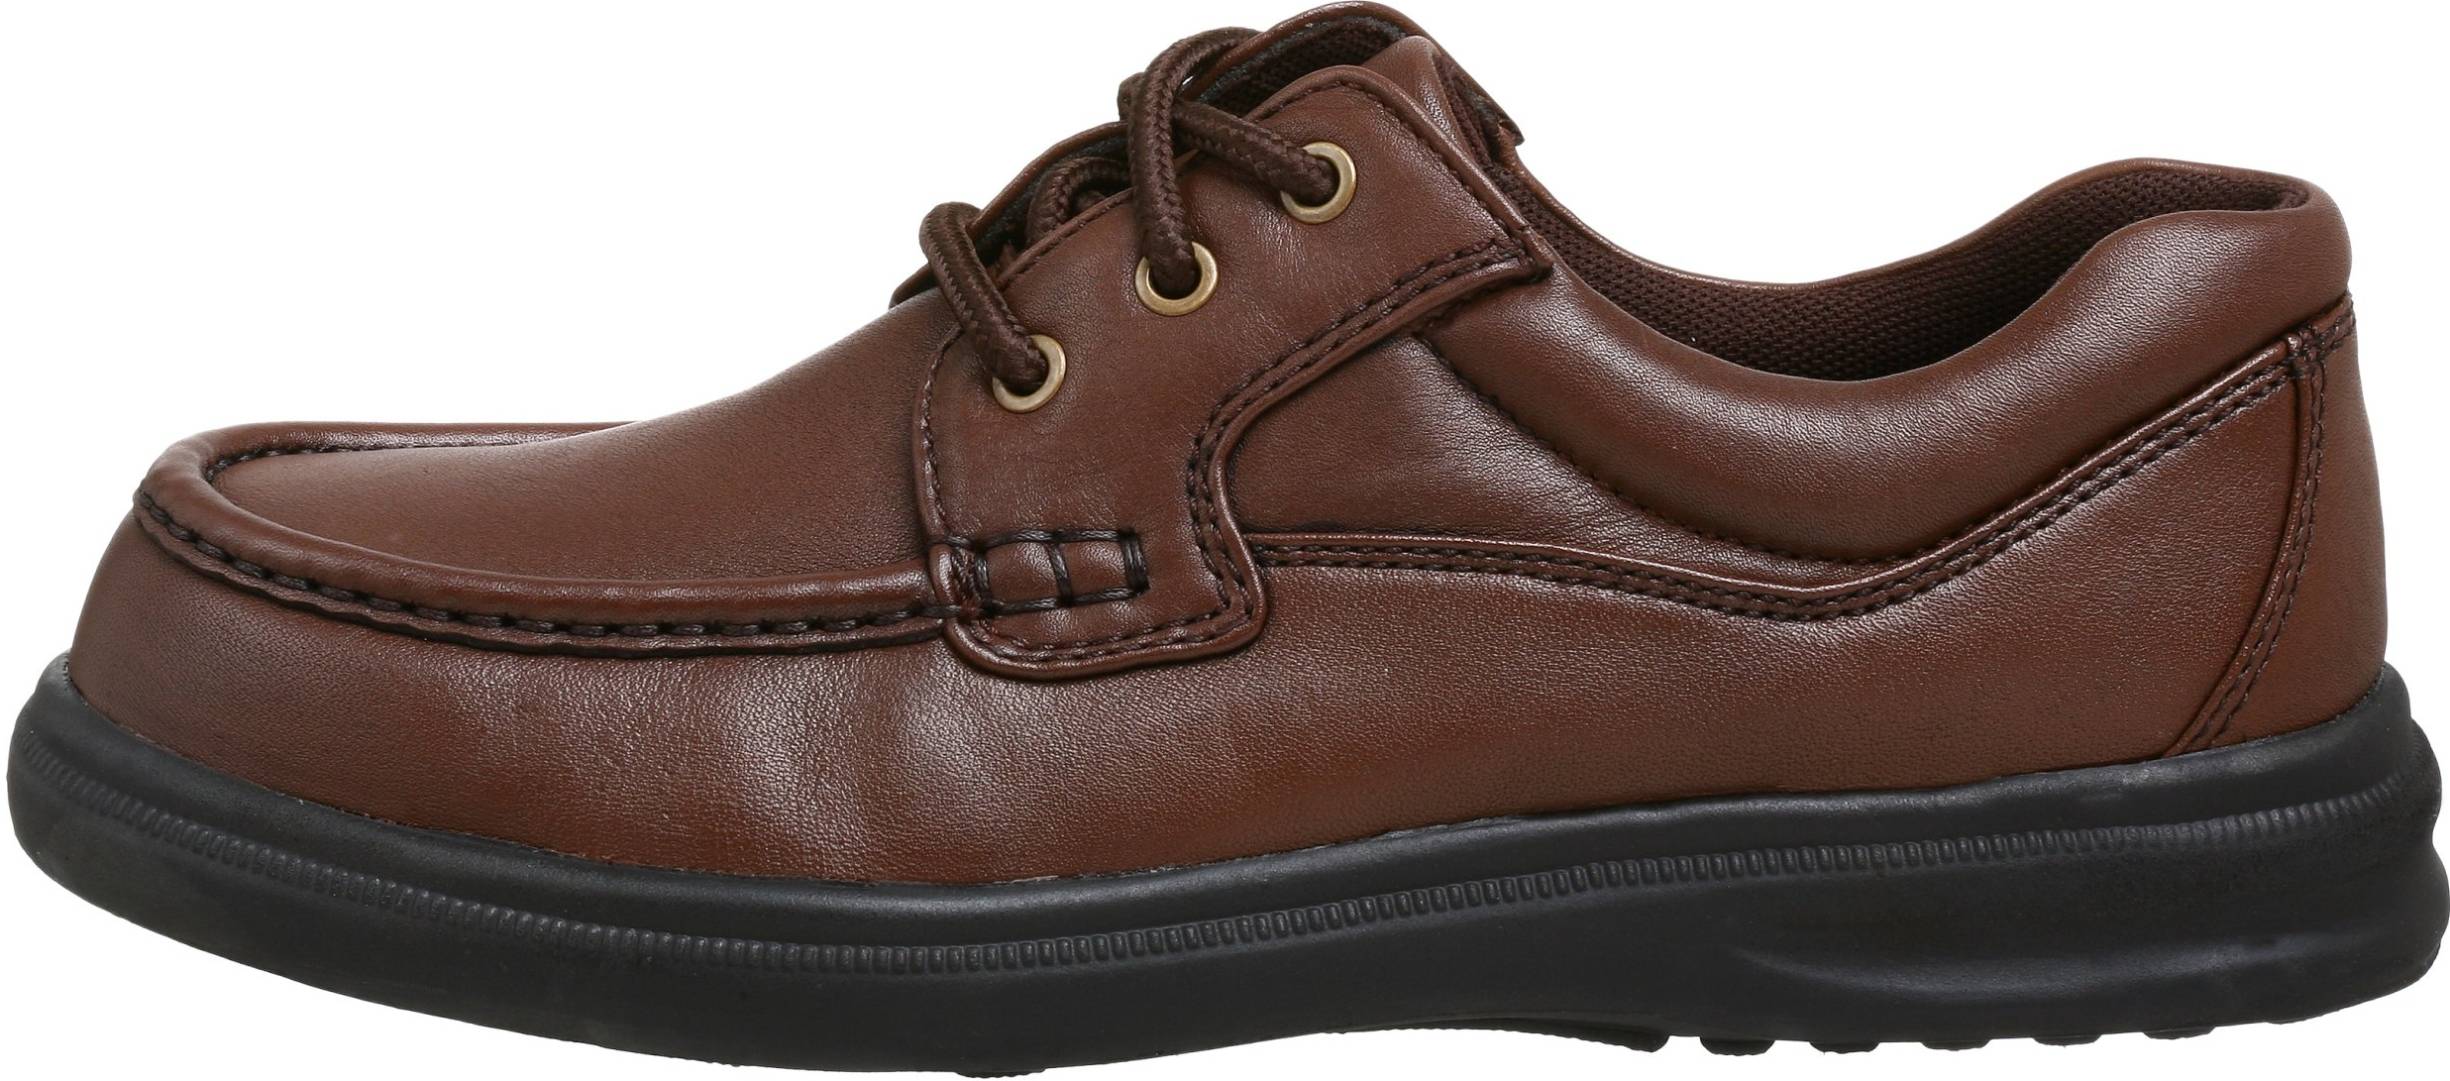 price shoes hush puppies